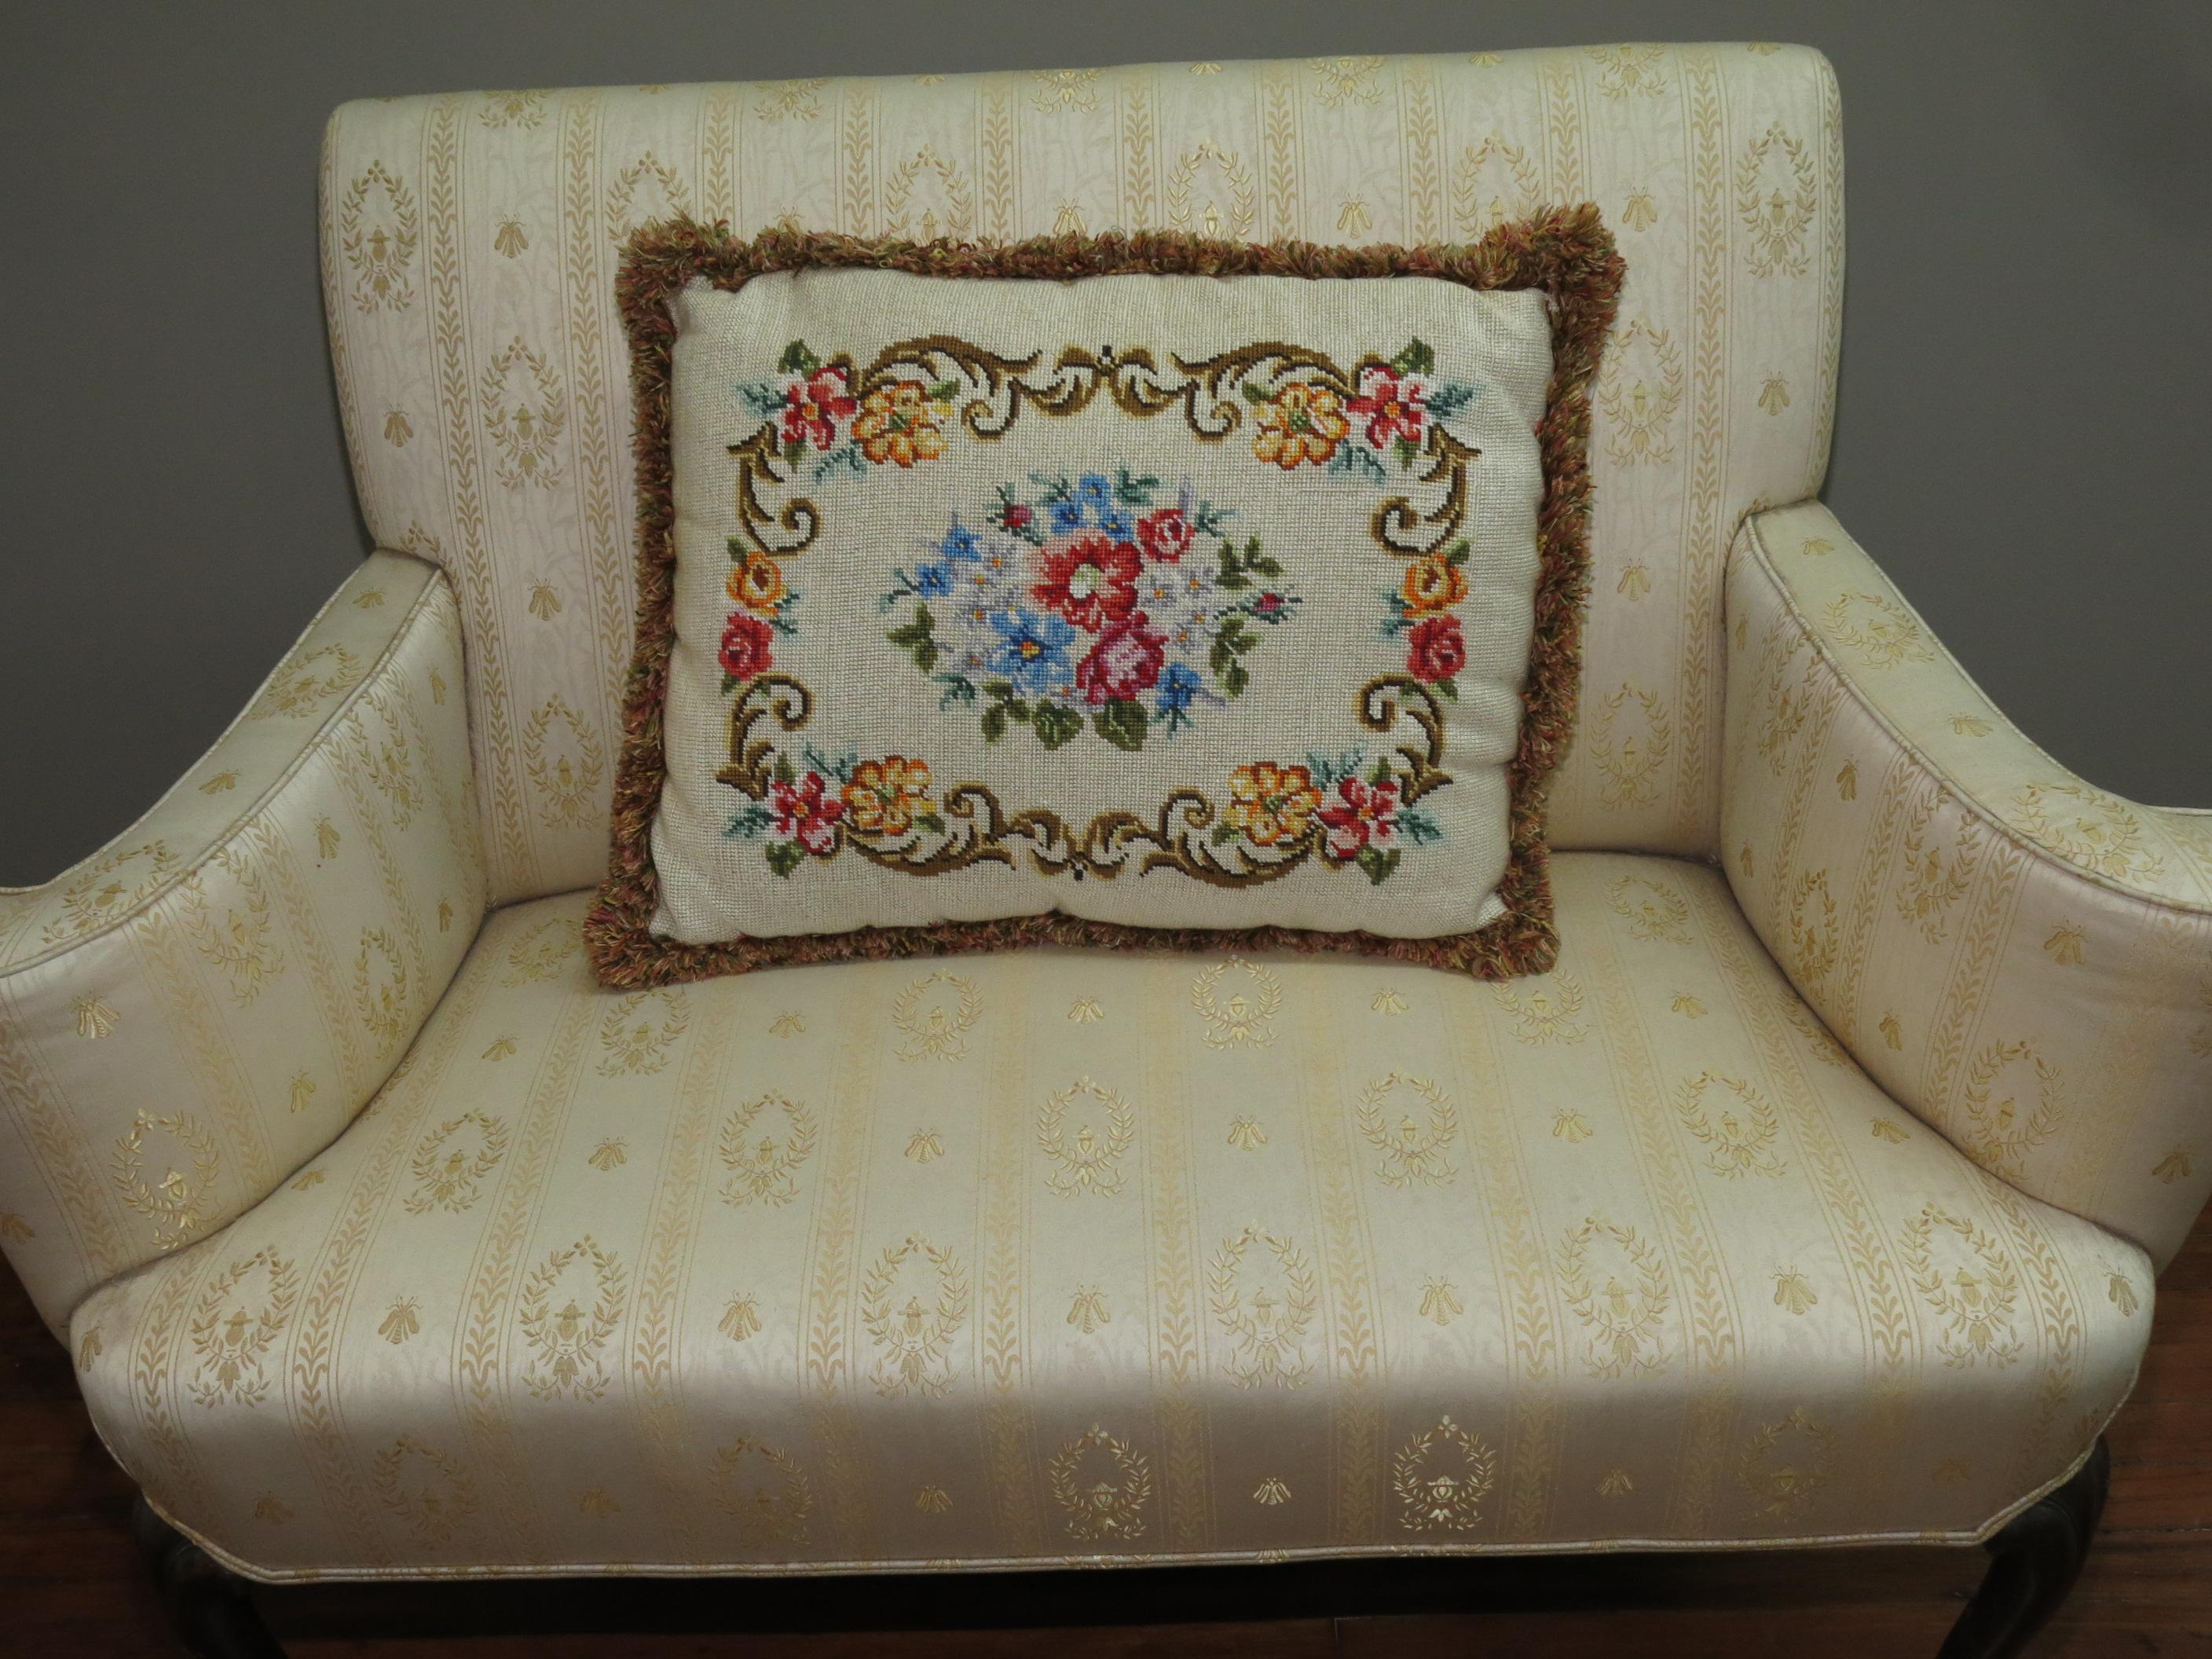 Pair of pillows made from an English needlepoint from the second quarter of the 20th century. Sewn shut

Measures: 17